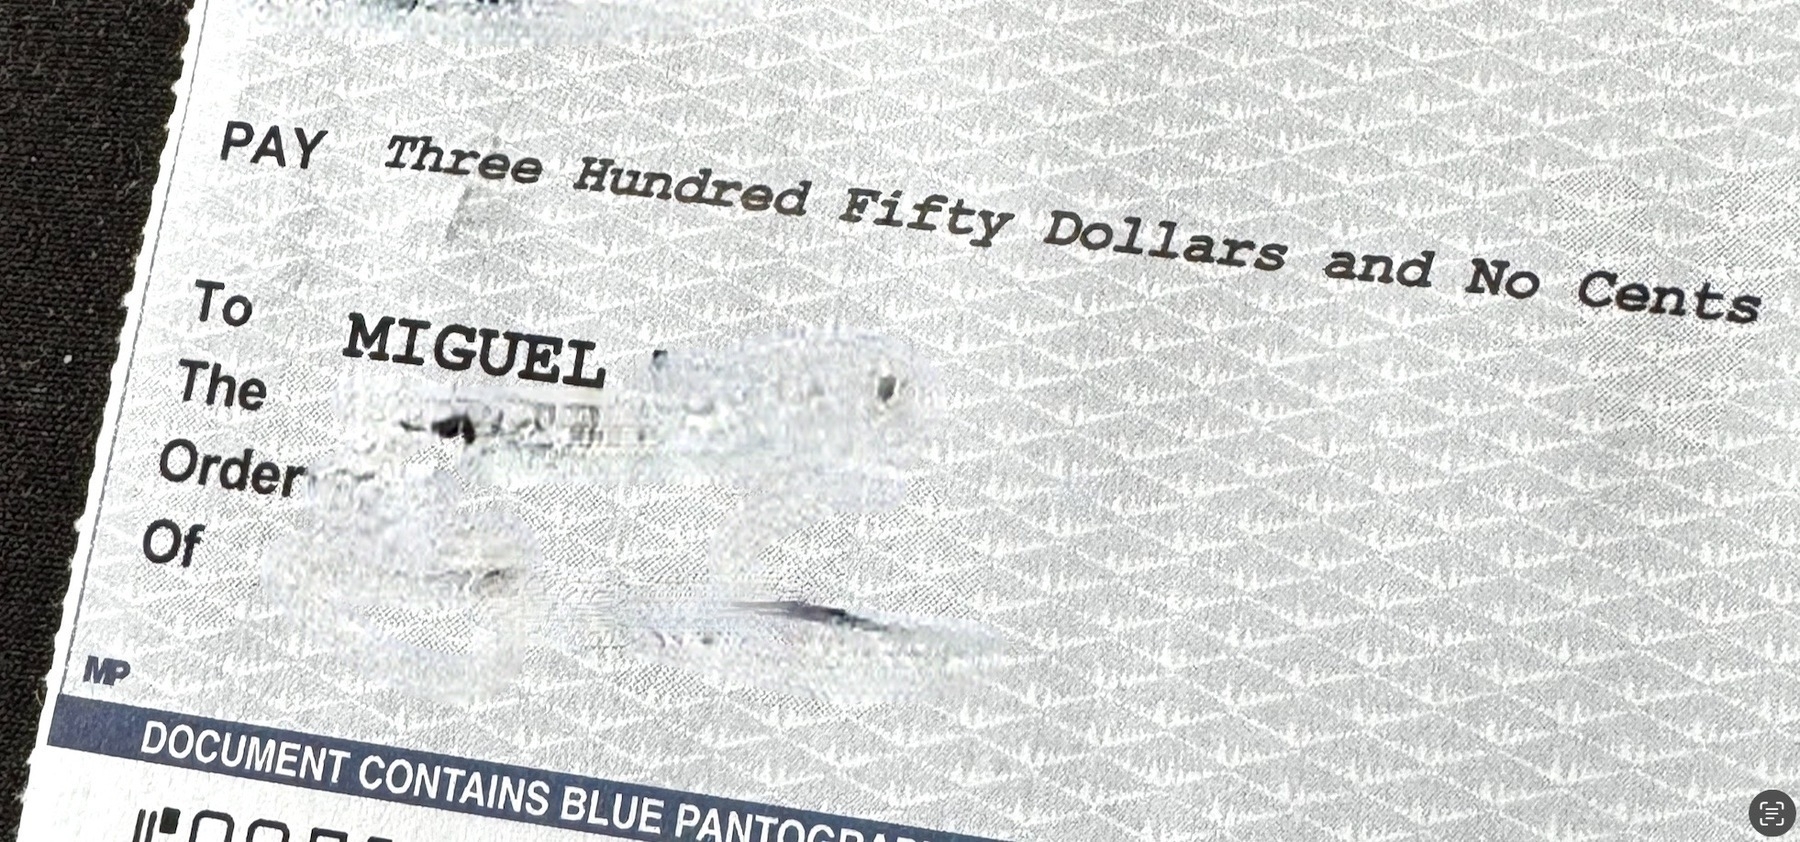 Close-up of a check with the text "Pay Three Hundred Fifty Dollars and No Cents" and "To the Order of MIGUEL". The check features a security pattern and text stating "DOCUMENT CONTAINS BLUE PANTOGRAPH".